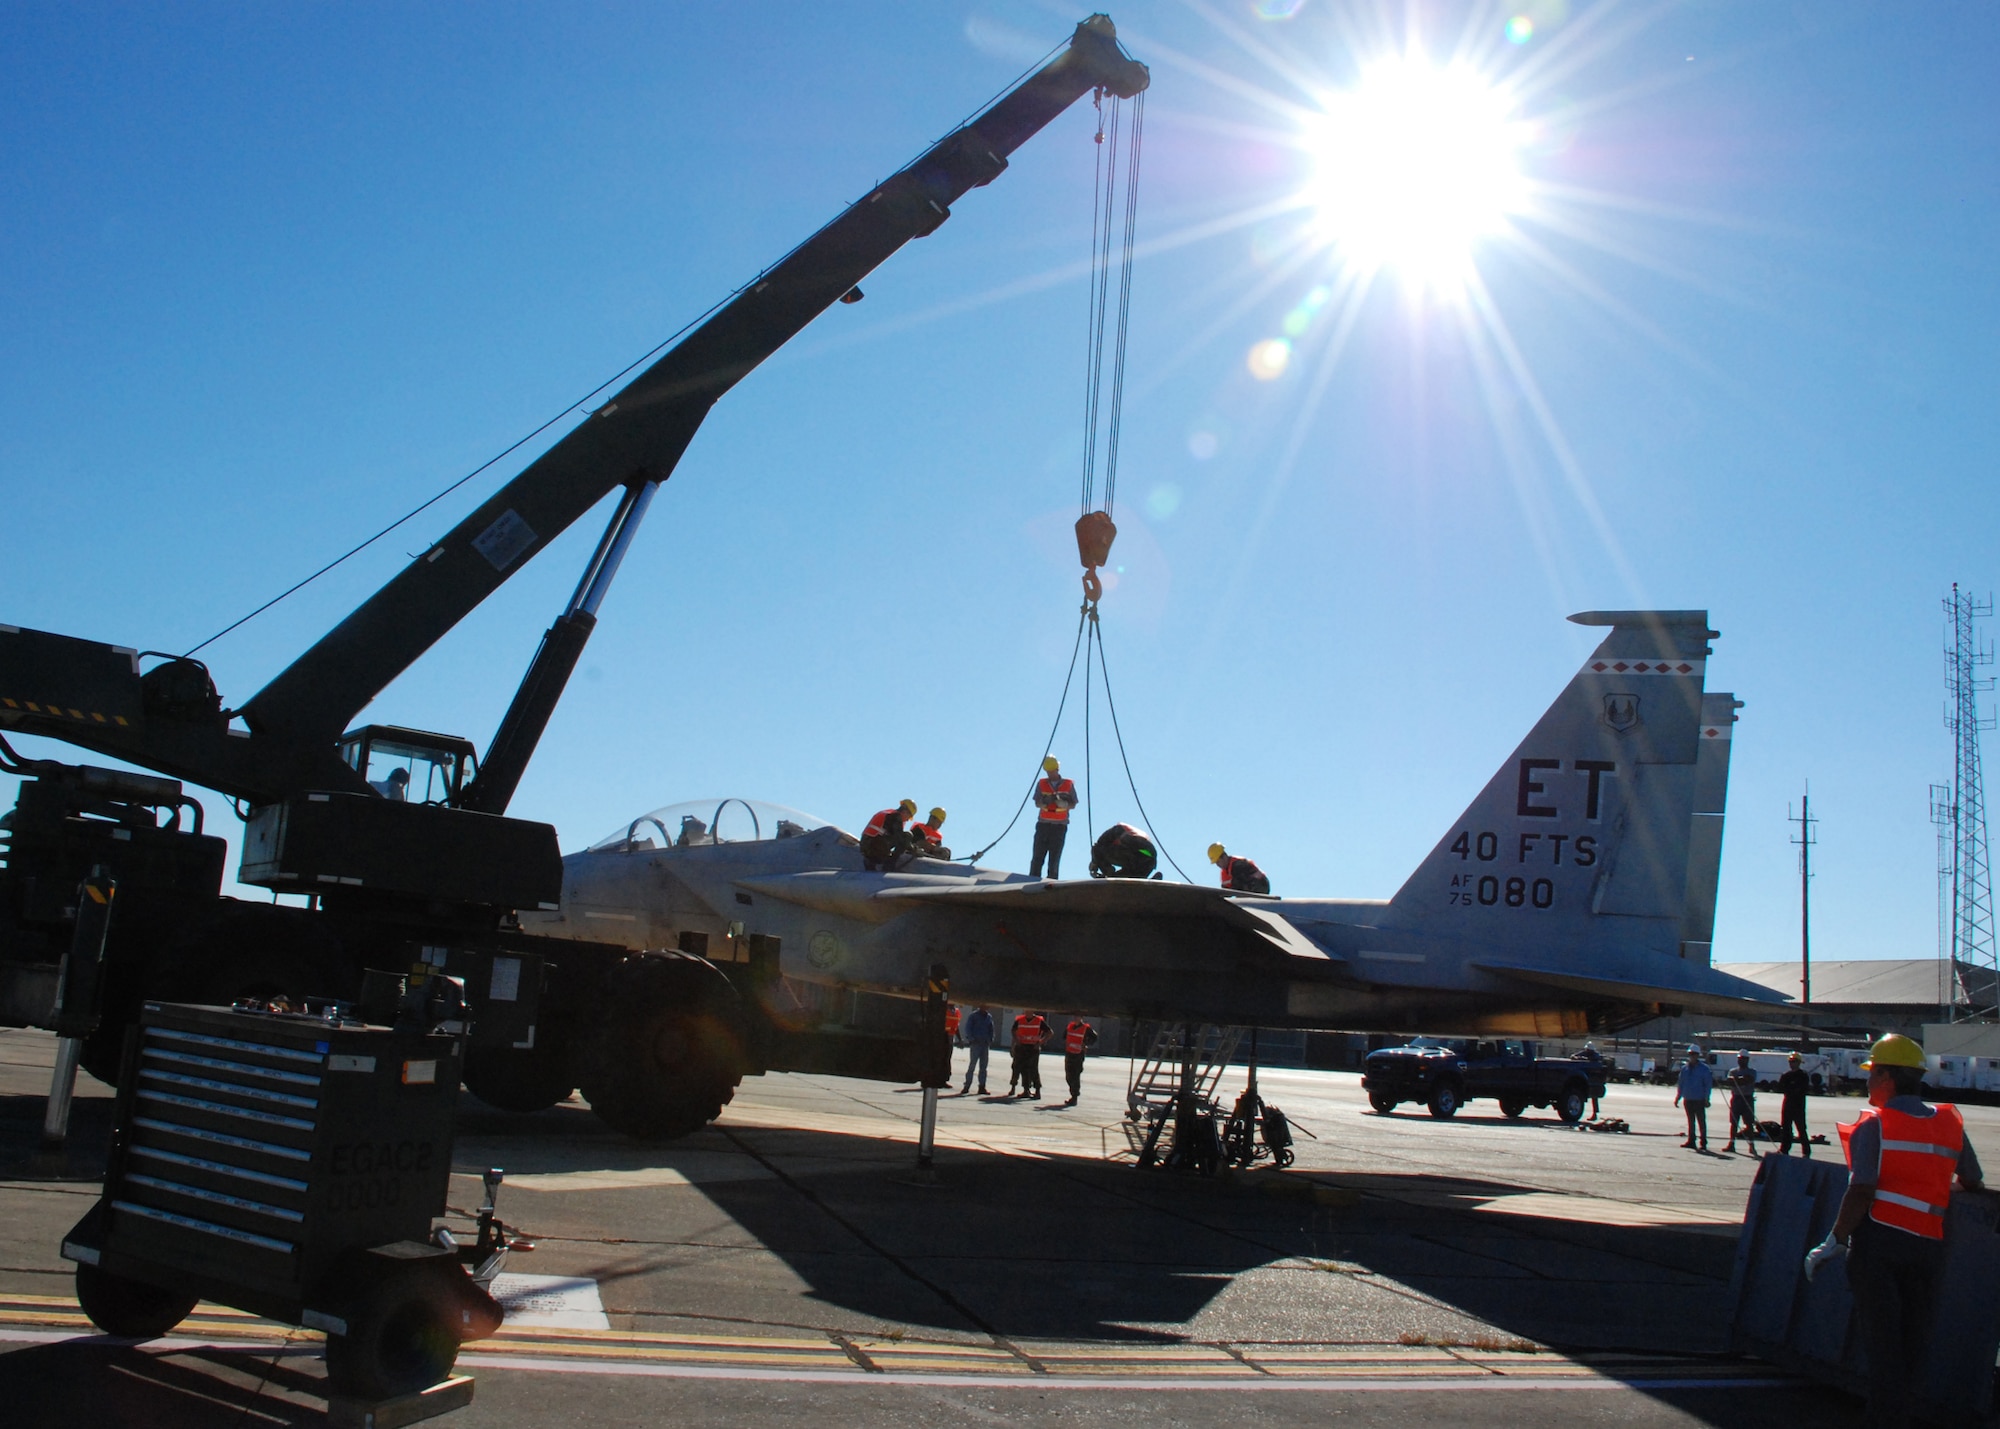 EGLIN AIR FORCE, Fla. -- Members of the 33rd Maintenance Sqaudron help secure the cables to an F-15 to be hoisted by a crane and loaded onto a flatbed trainler for transport Oct. 12. Indyne Inc. U.S. Targets and the 46th Test Wing is moving the F-15 to Range 52 for future testing missions.The crew, lifted the aircraft, collapsed the landing gear and hoisted it onto a flatbed trailer to be transported to Range 52 off Range Road 213. They are scheduled to move the jet beginning at 2 a.m. Oct. 13. (U.S Air Force Photo by Staff Sgt. Mike Meares)